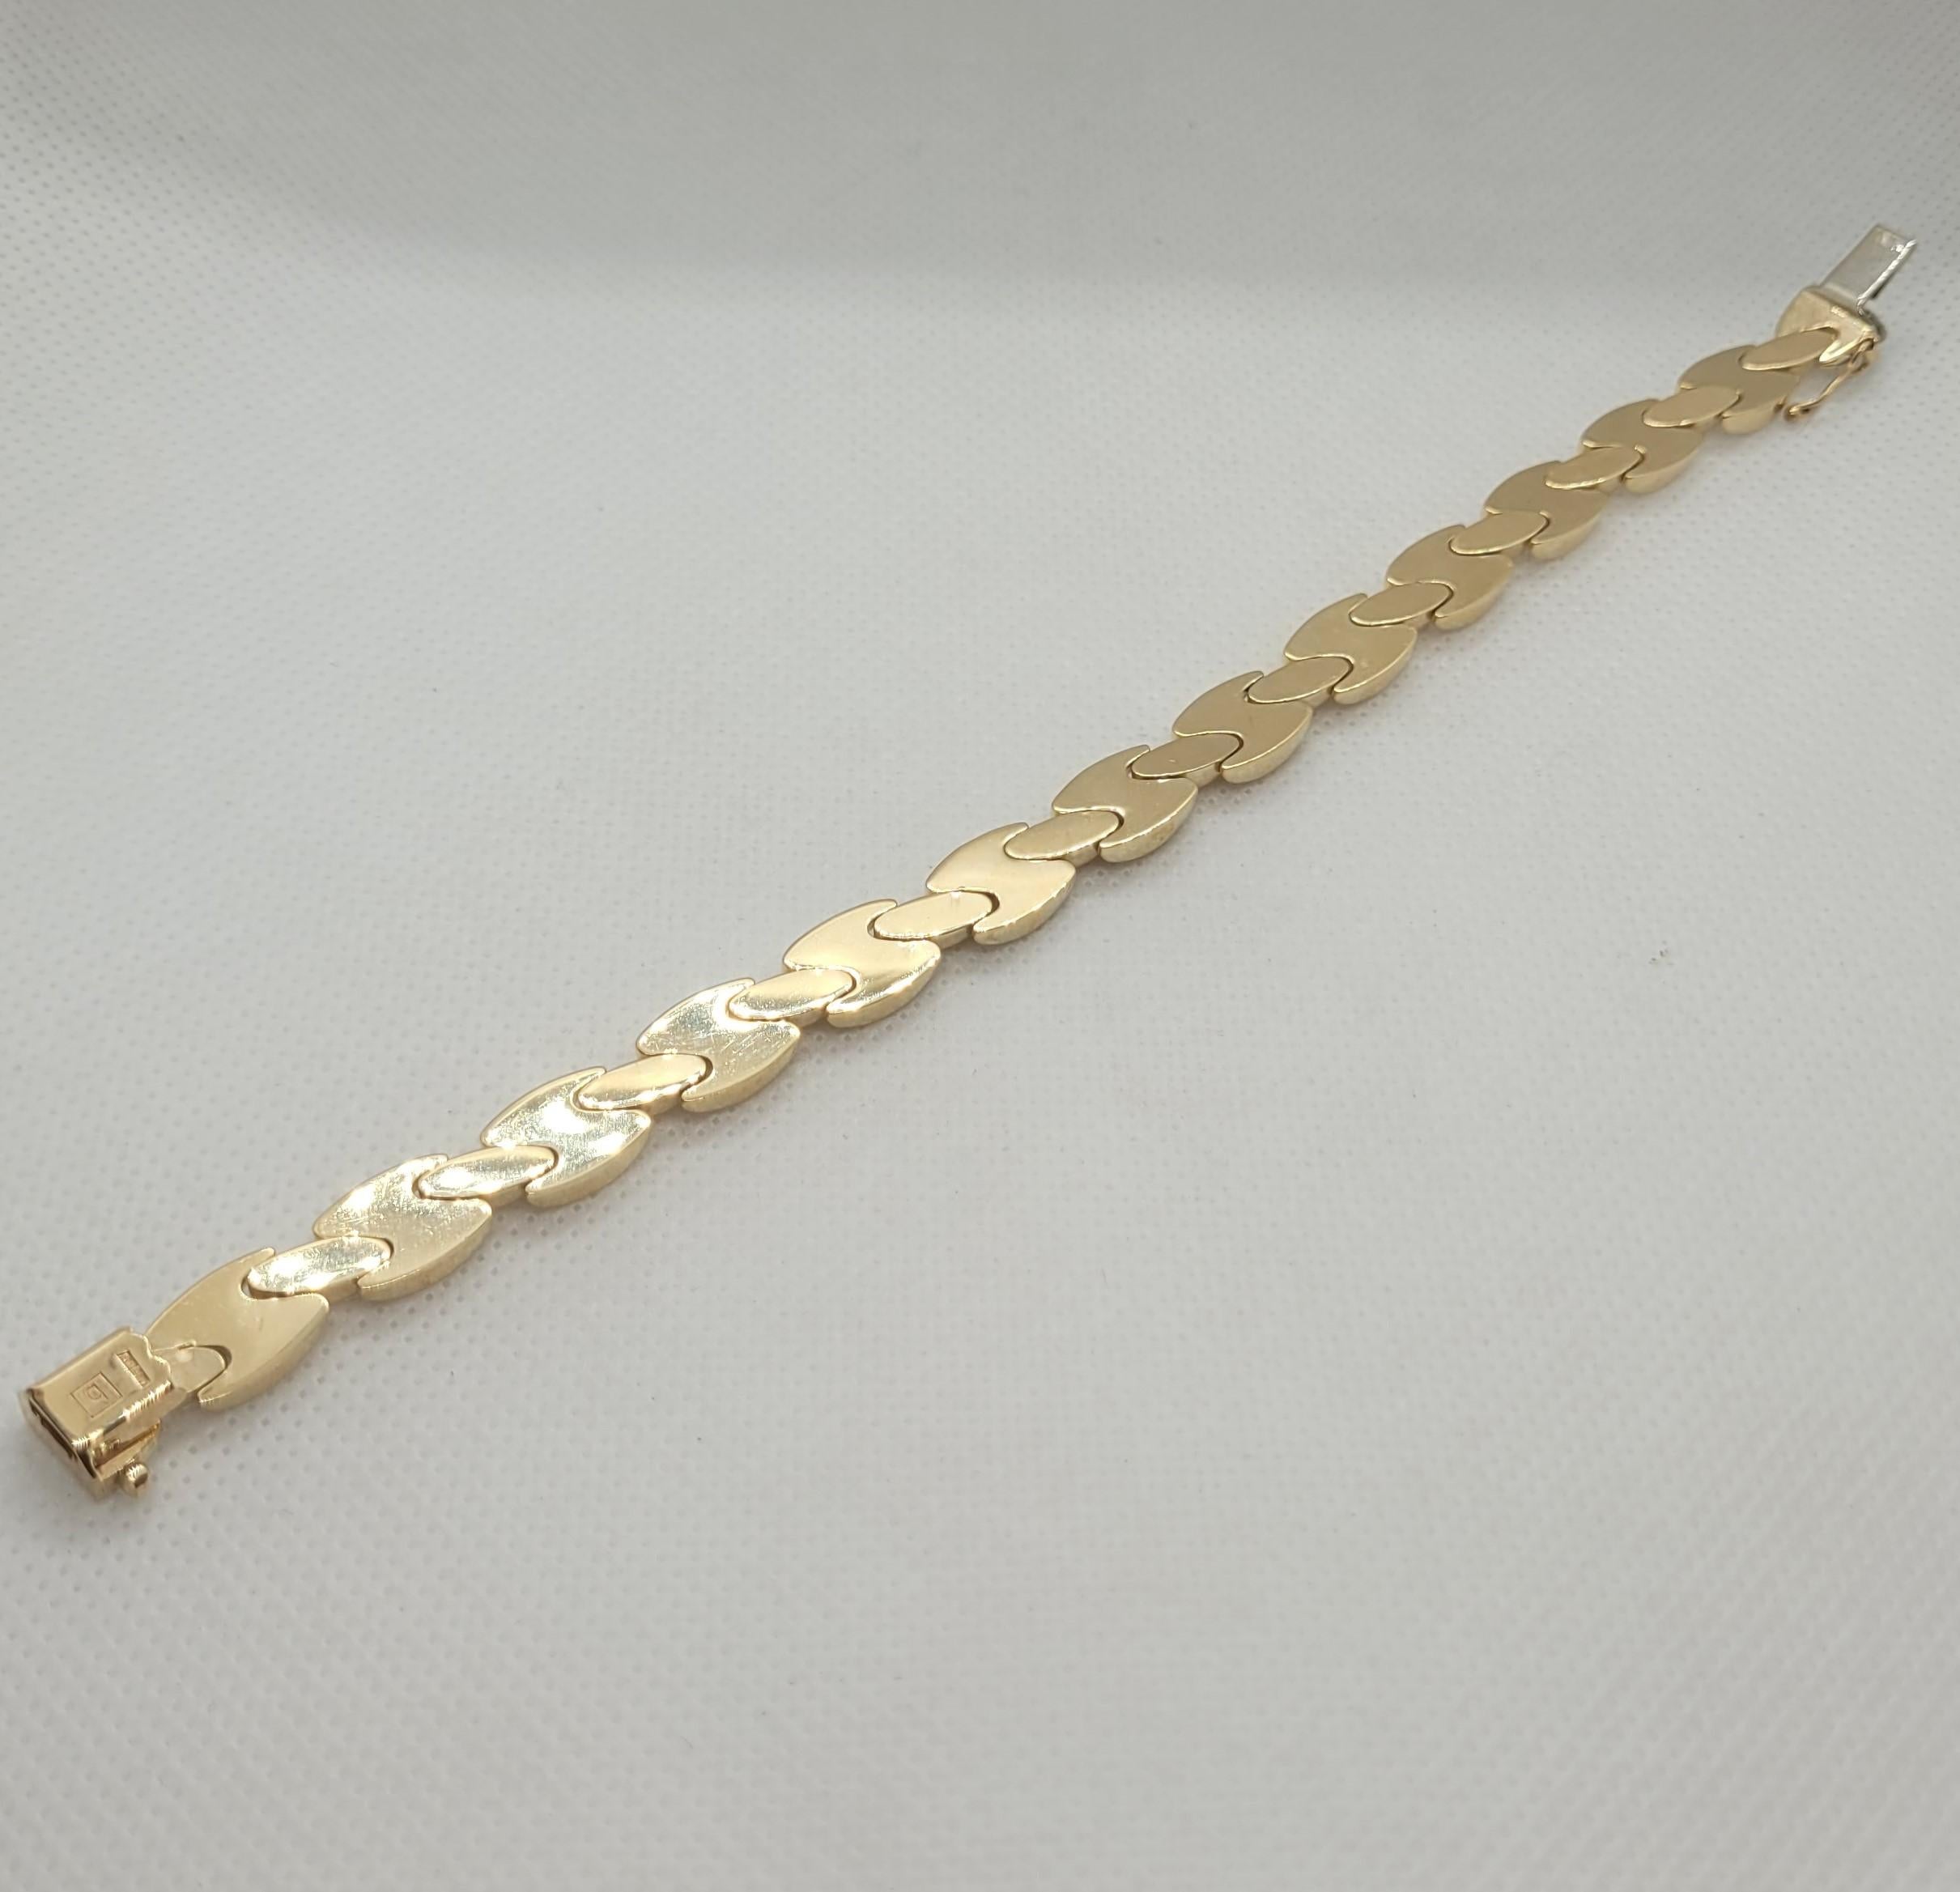 Beautiful 7-inch 14kt yellow gold link Italian-made bracelet, 8mm wide and 3mm thick with a push-in clasp secured with a safety chain. The bracelet is hollow, weighs 13.2 grams, is stamped with a Designer stamp, and is 14k Italy. This bracelet is